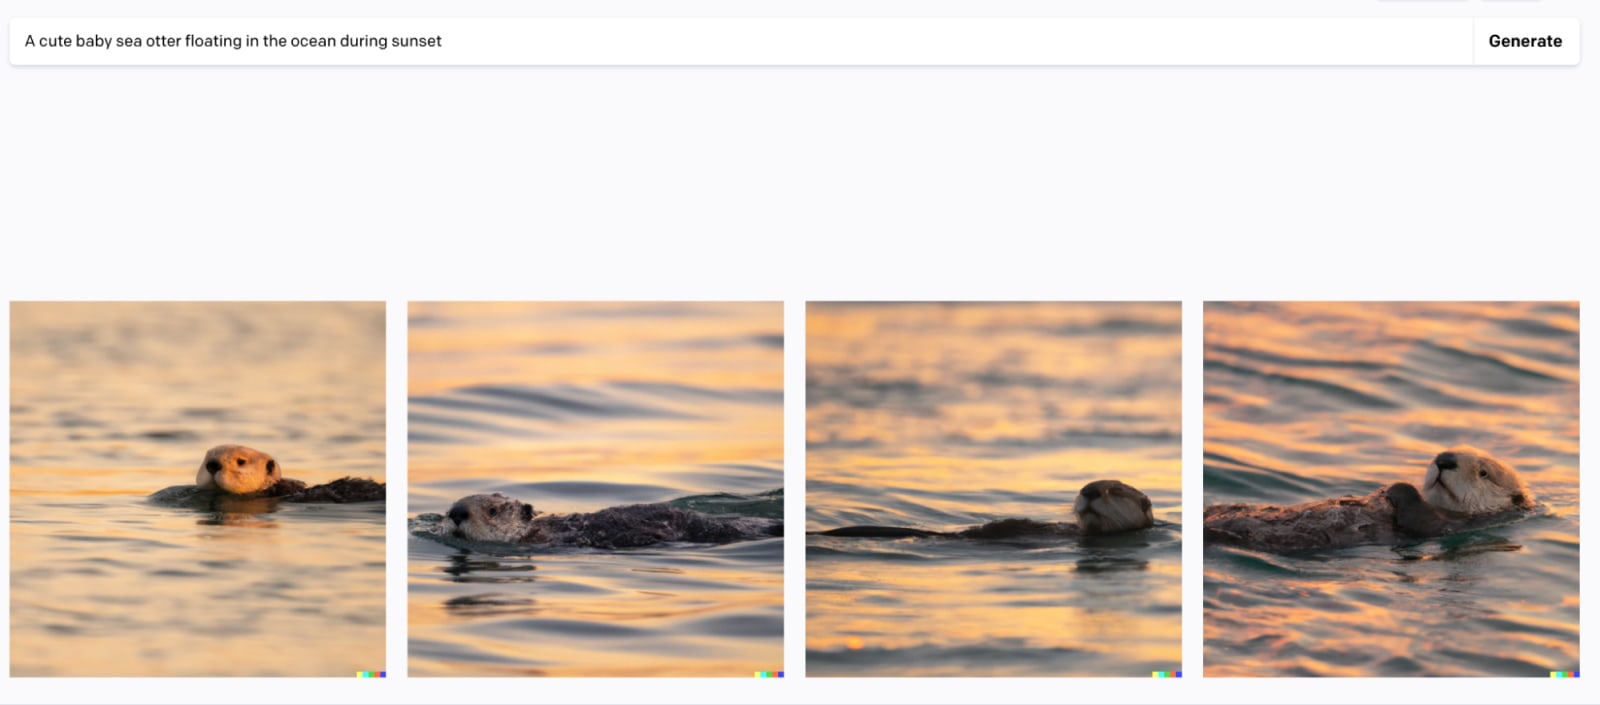 Four similar images to the previous four images of a sea otter floating in water but with orange and yellow overtones indicating the picture is at sunset